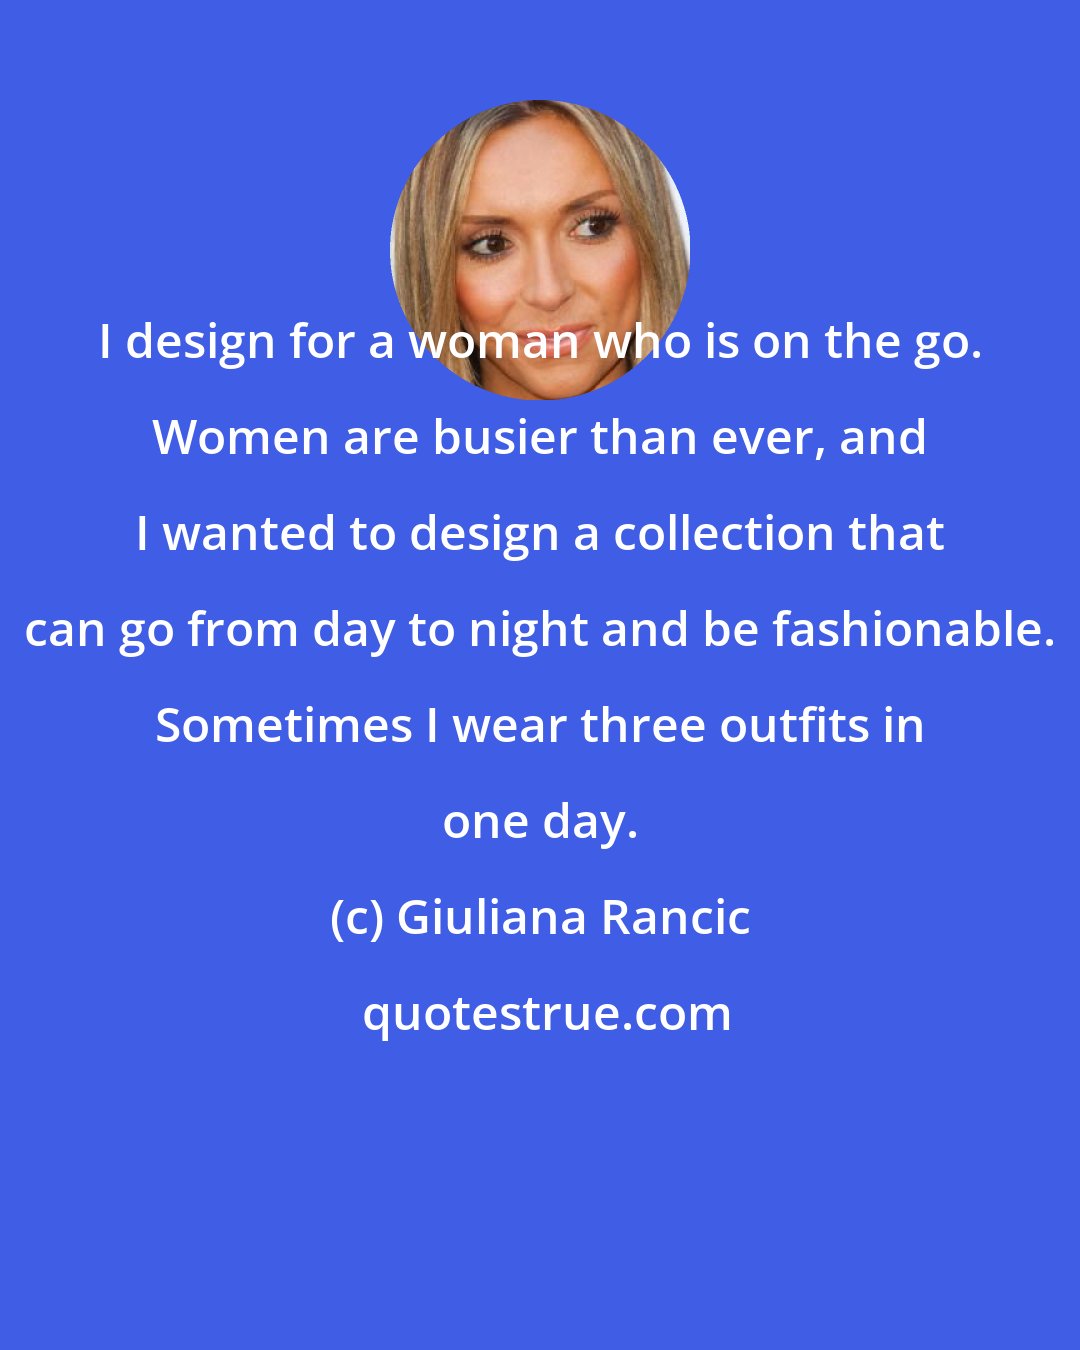 Giuliana Rancic: I design for a woman who is on the go. Women are busier than ever, and I wanted to design a collection that can go from day to night and be fashionable. Sometimes I wear three outfits in one day.